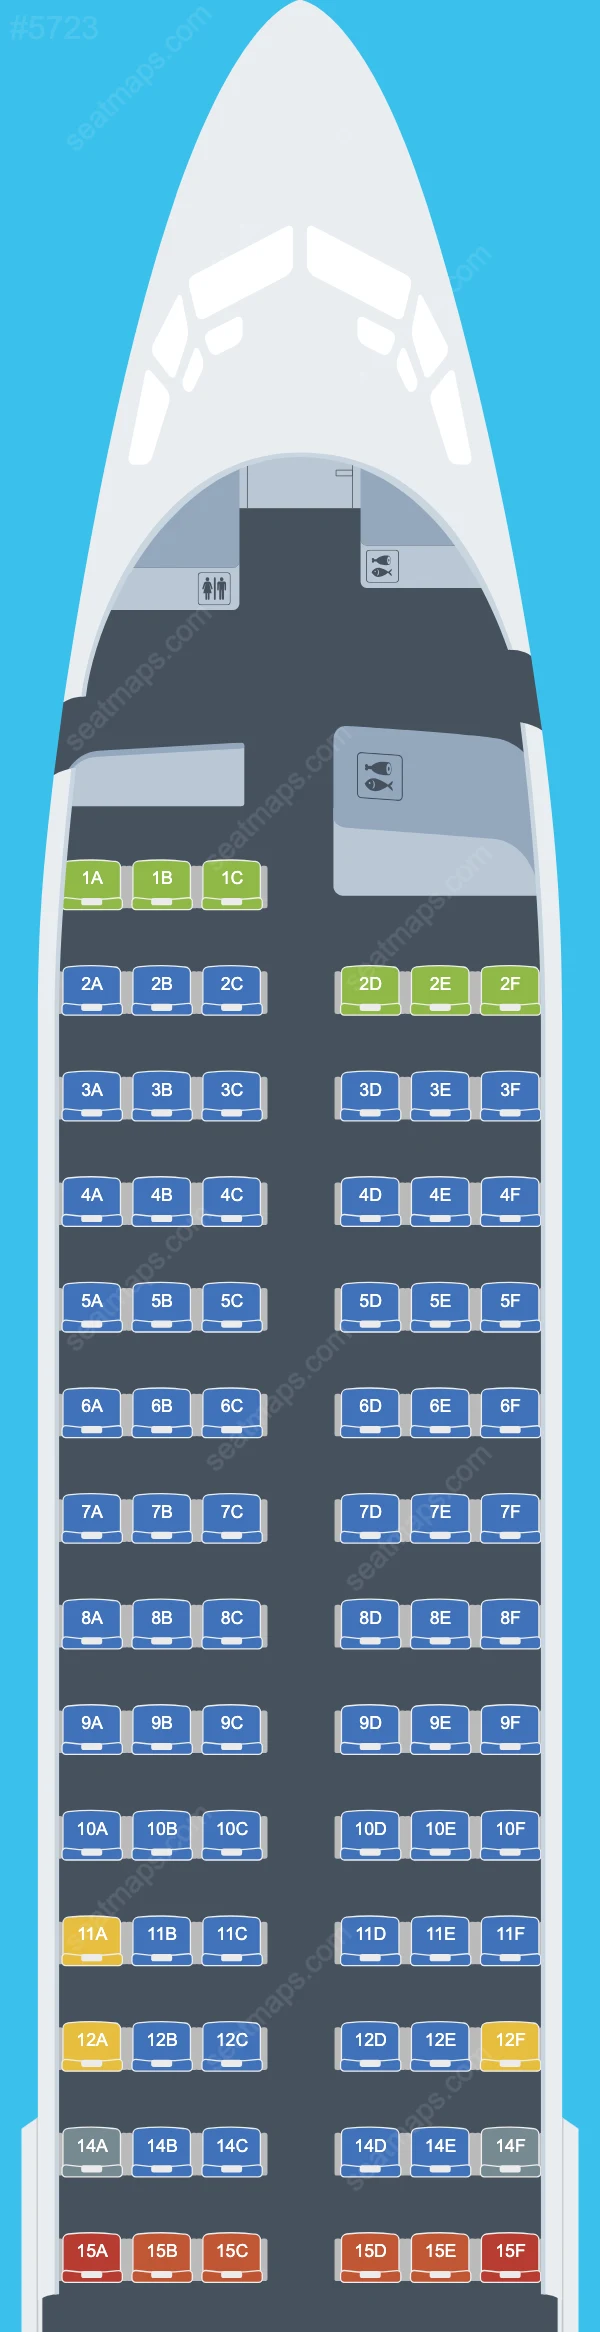 Corendon Airlines Boeing 737 Seat Maps 737-800